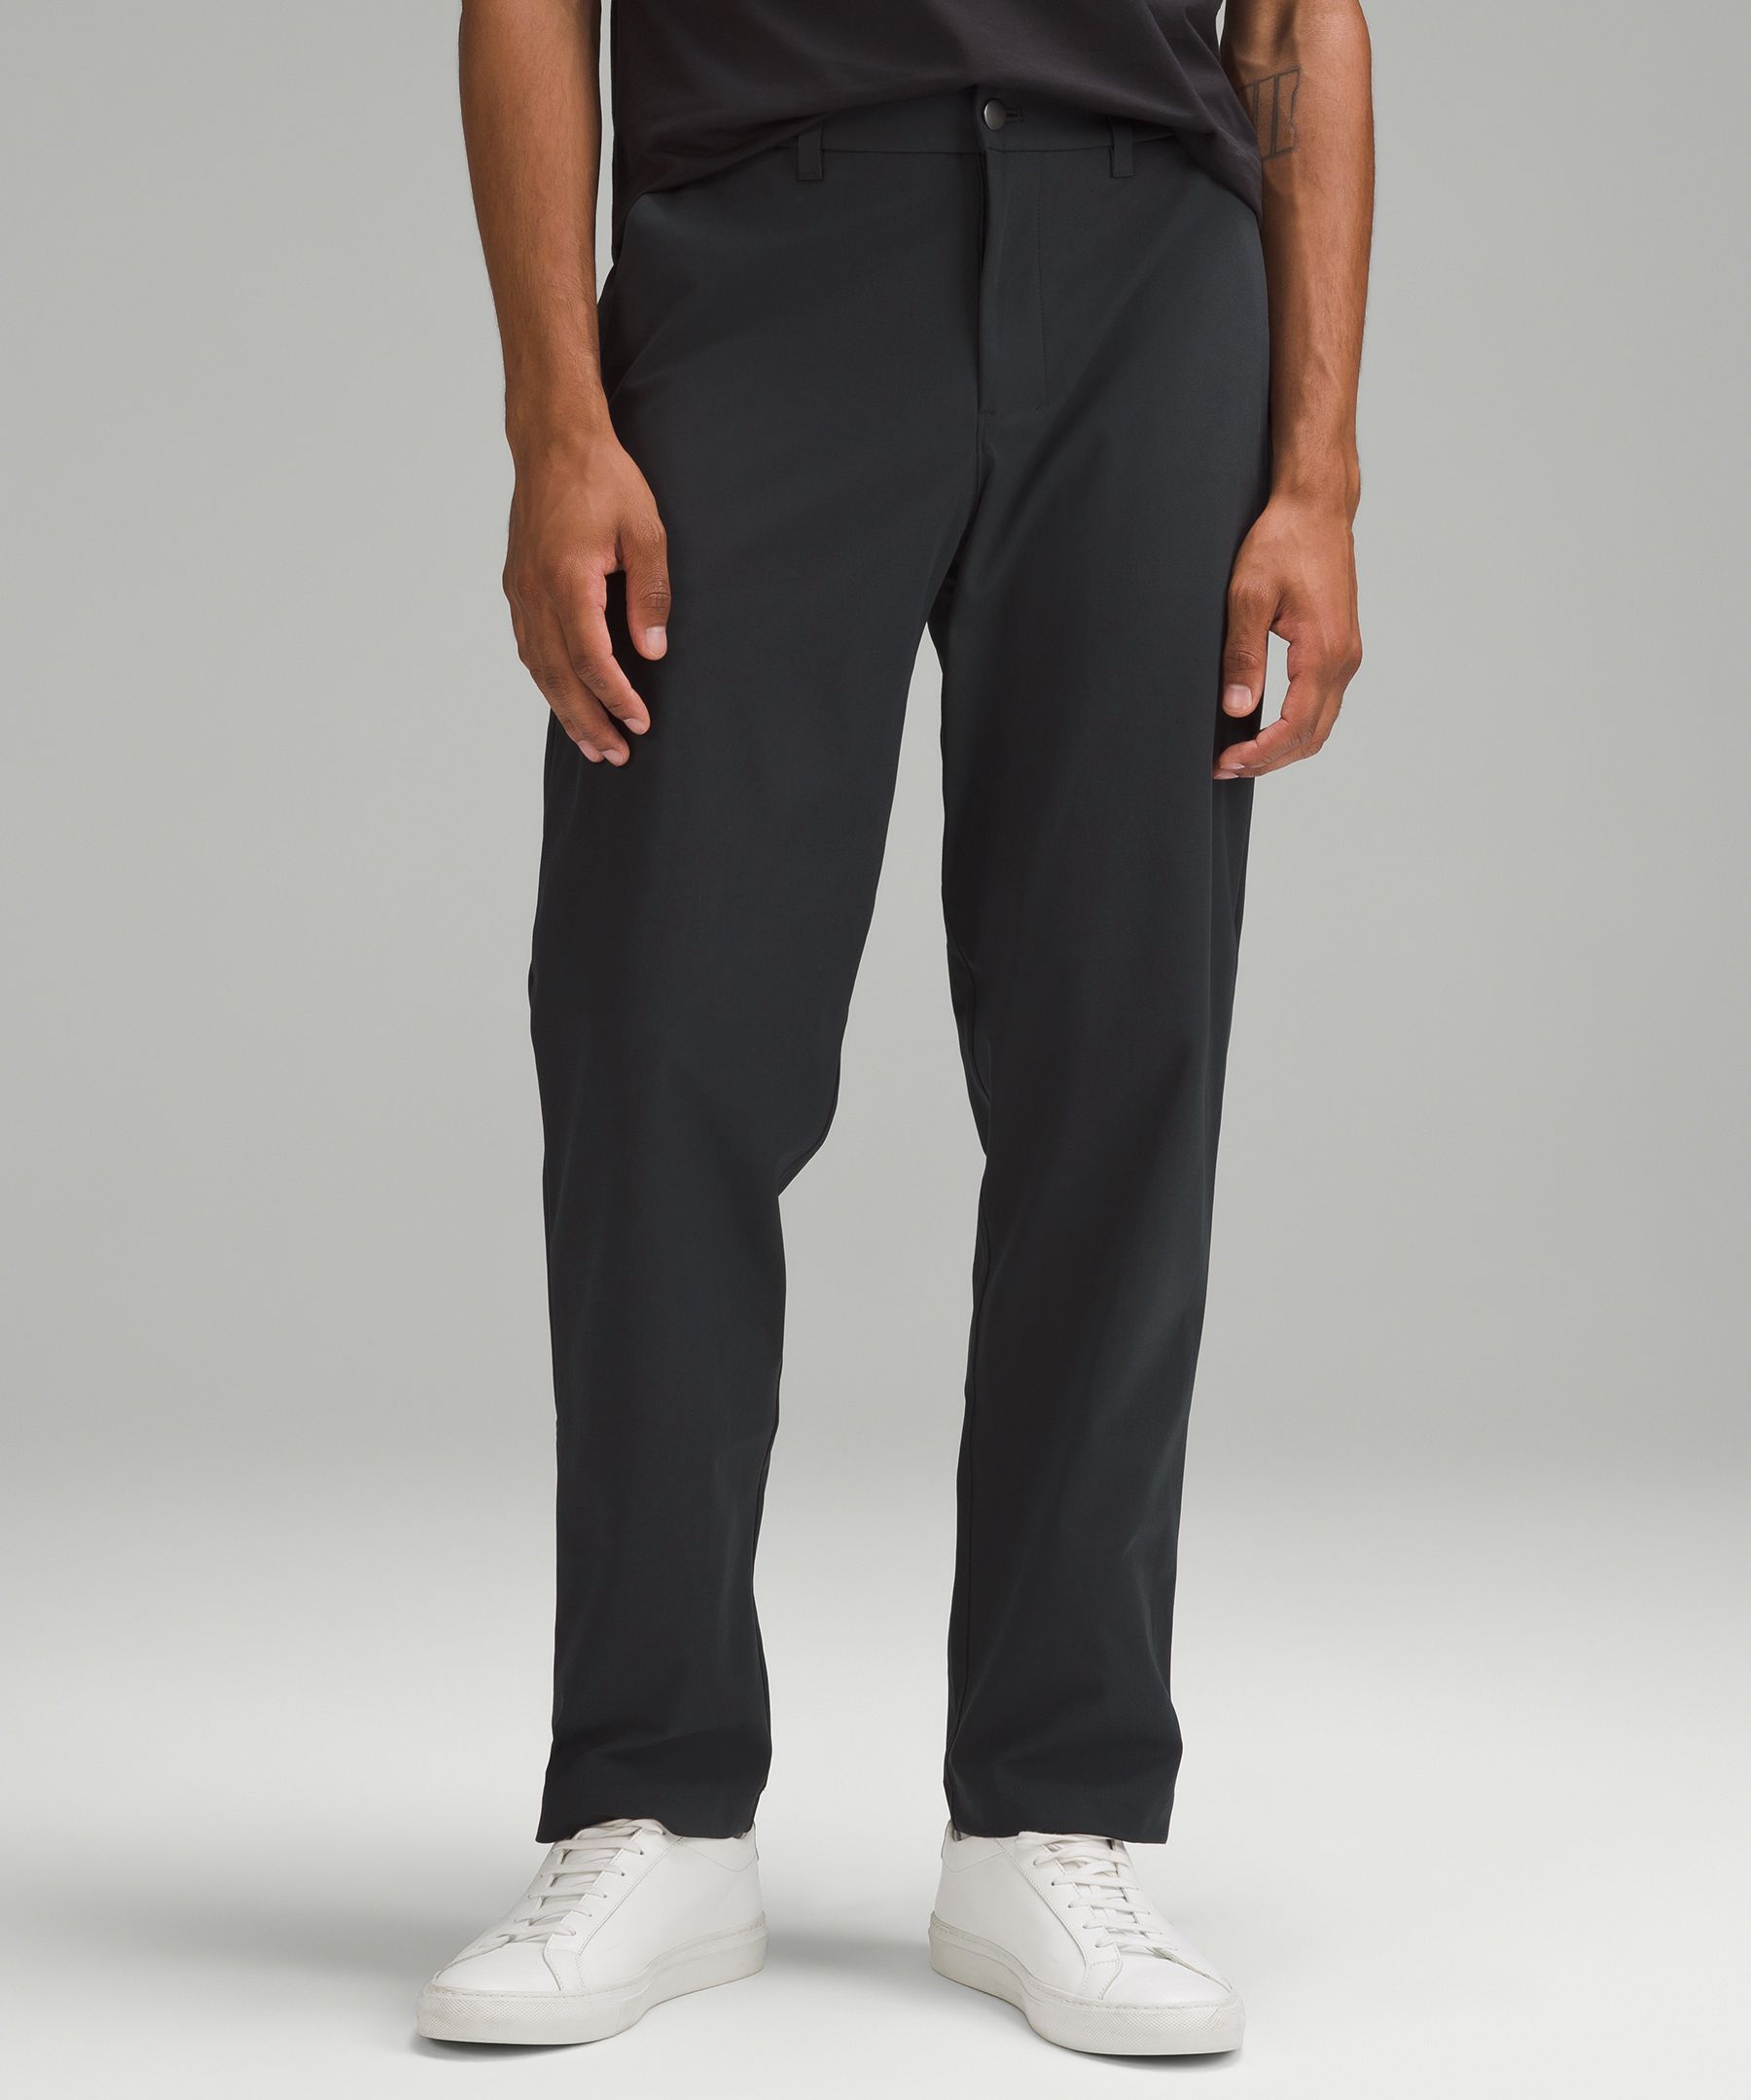 Lululemon Abc Relaxed-fit Trousers 32l Warpstreme